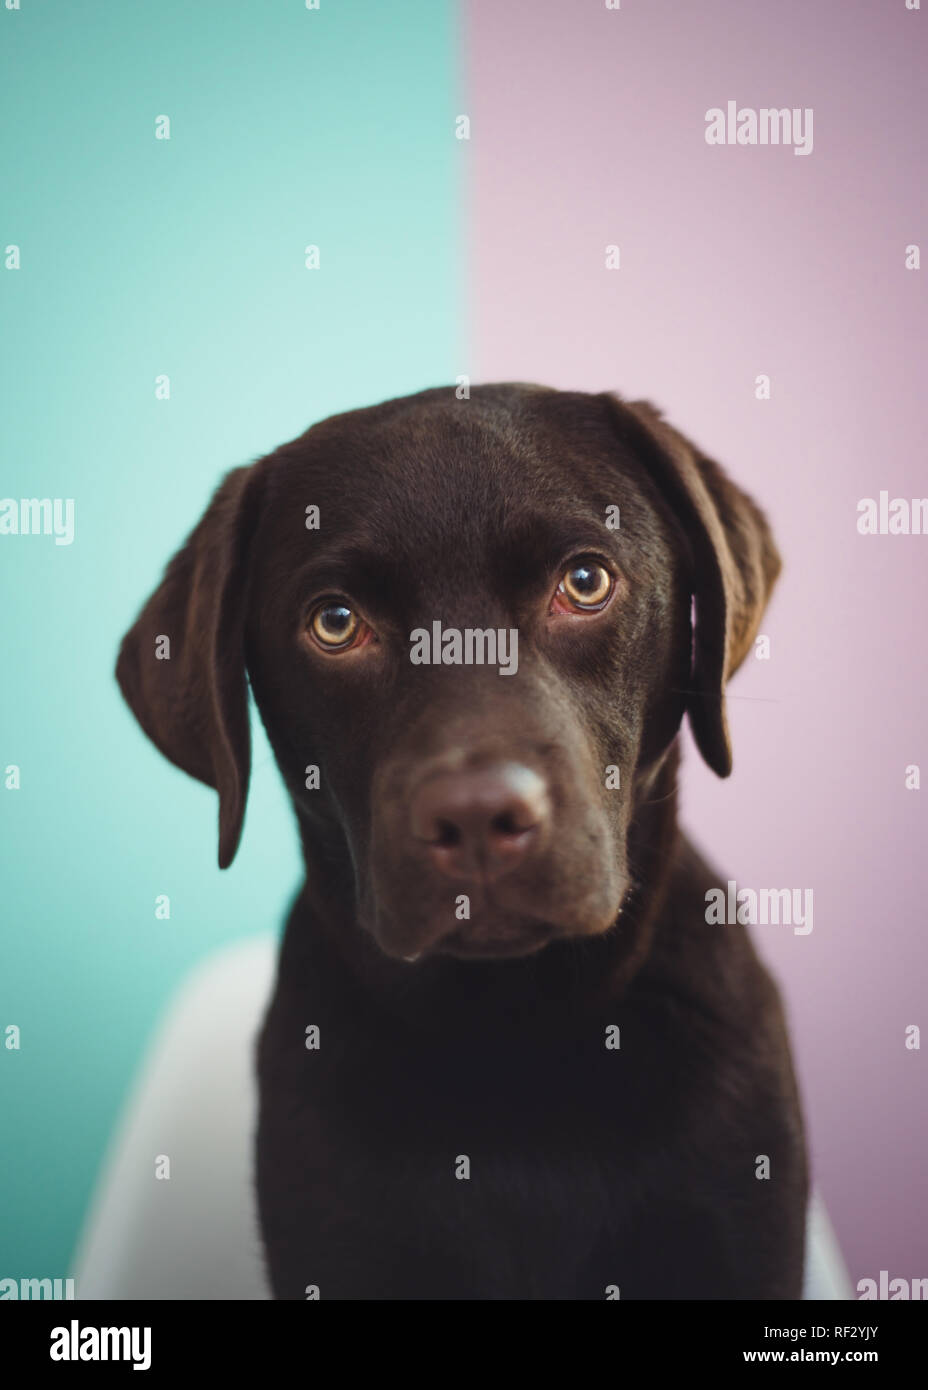 Chocolate brown lab puppy, looking at camera in front of a colorful wall. Adorable face. Stock Photo